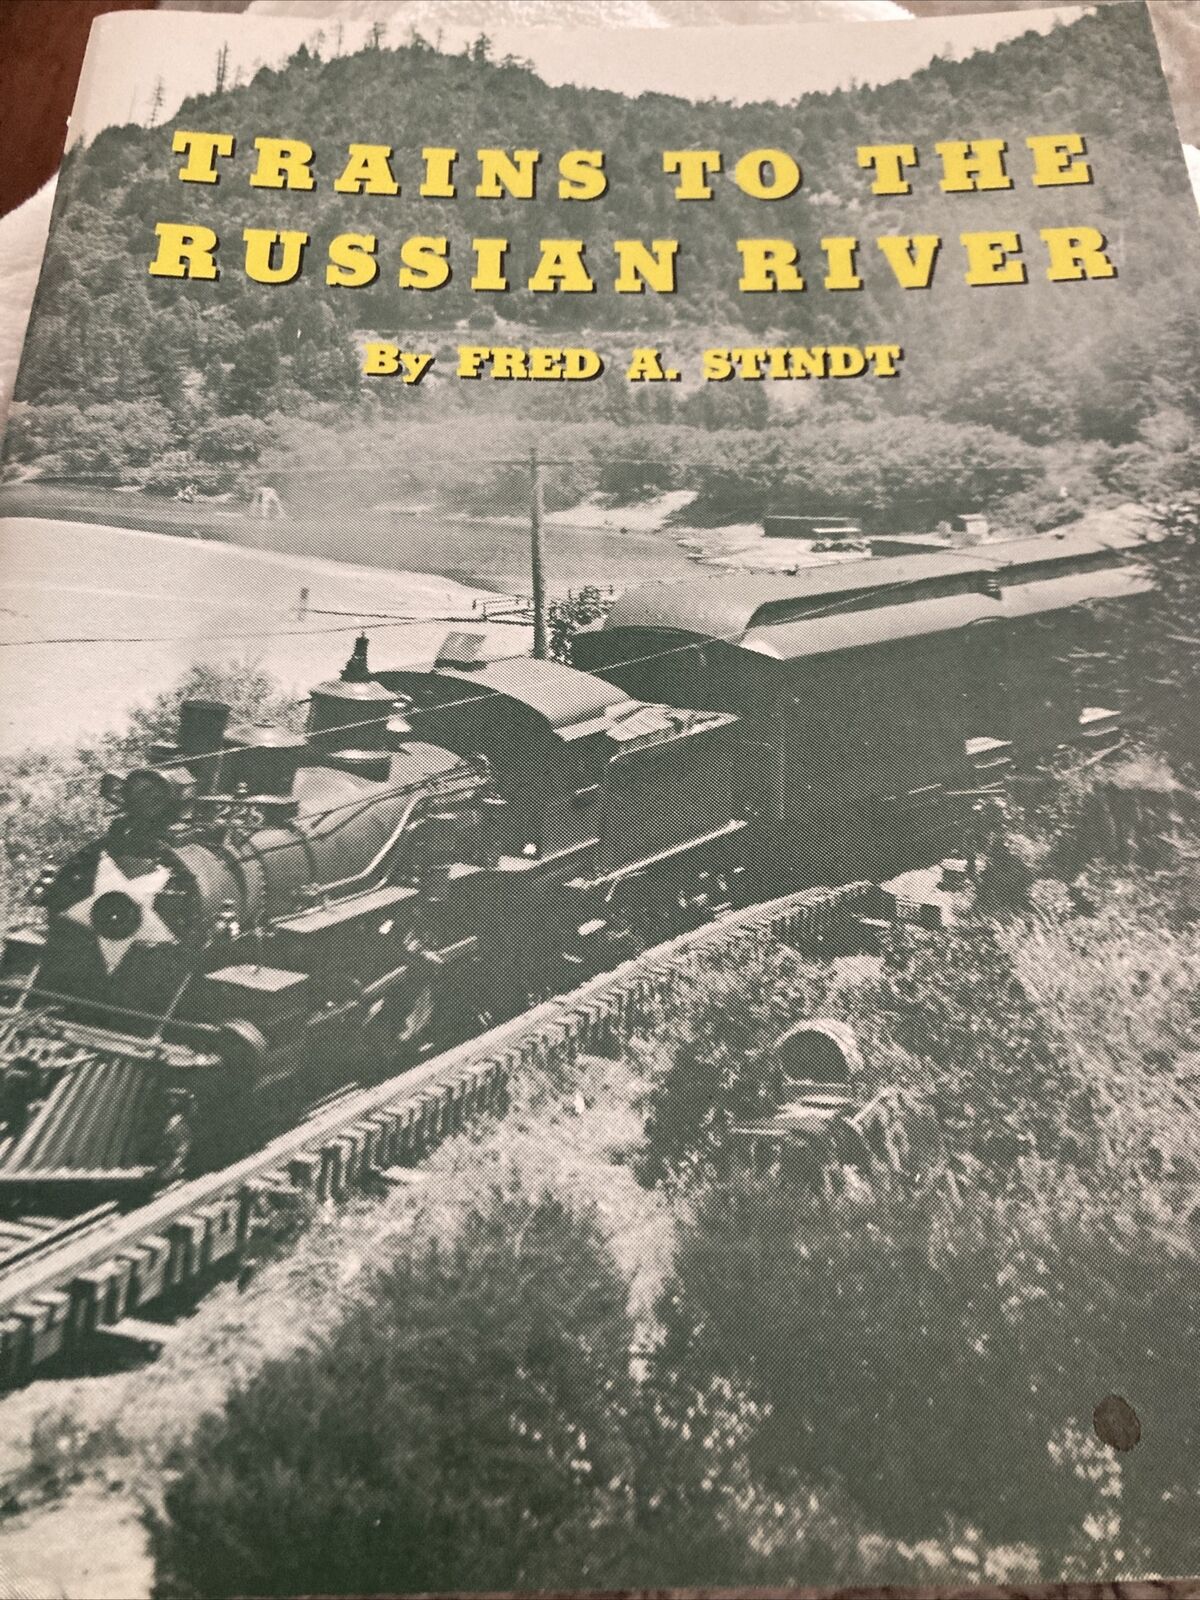 Trains to the Russian River by Author Fred A. Stindt Book Sonoma County